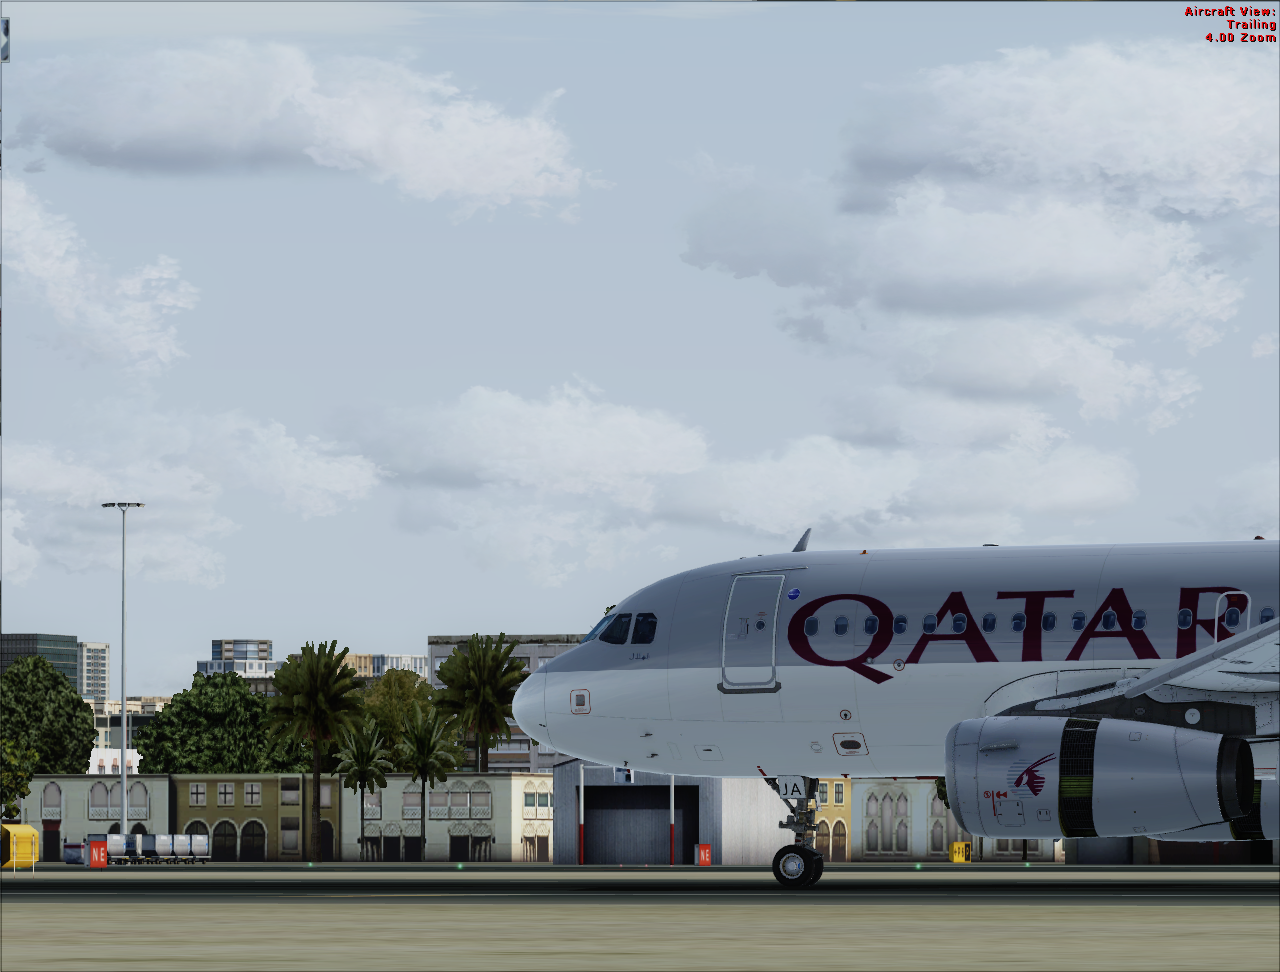 More information about "Qatar Airways Airbus A319-133(LR) A7-CJA"